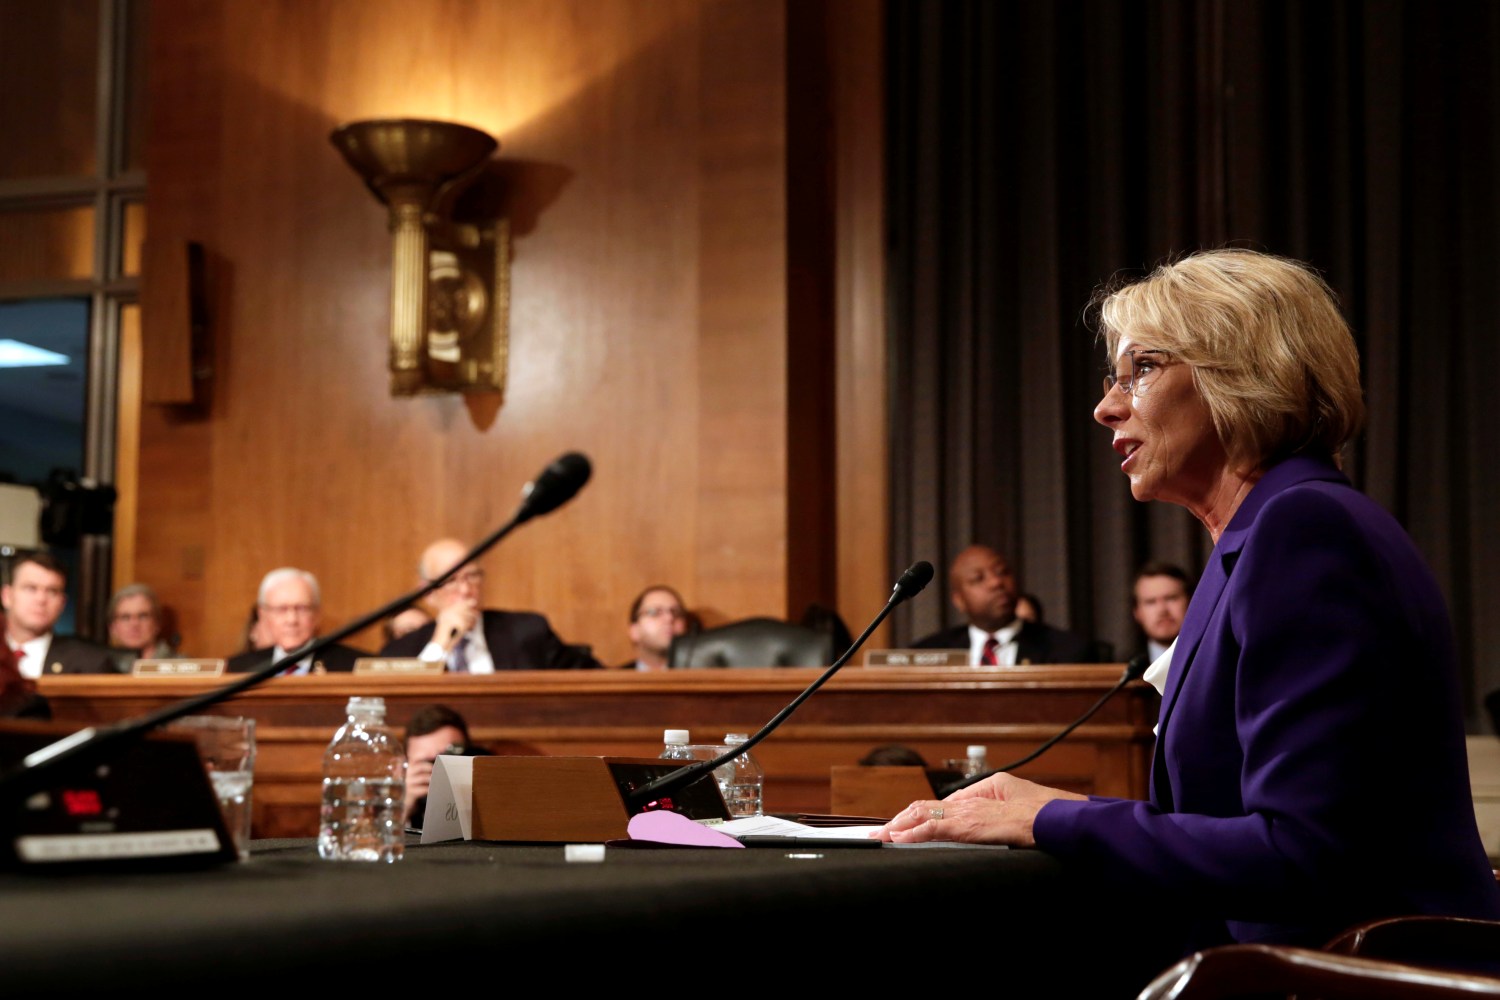 Betsy DeVos testifies before the Senate Health, Education and Labor Committee confirmation hearing to be next Secretary of Education on Capitol Hill in Washington, U.S., January 17, 2017. REUTERS/Yuri Gripas - RC1D5B7B0CF0